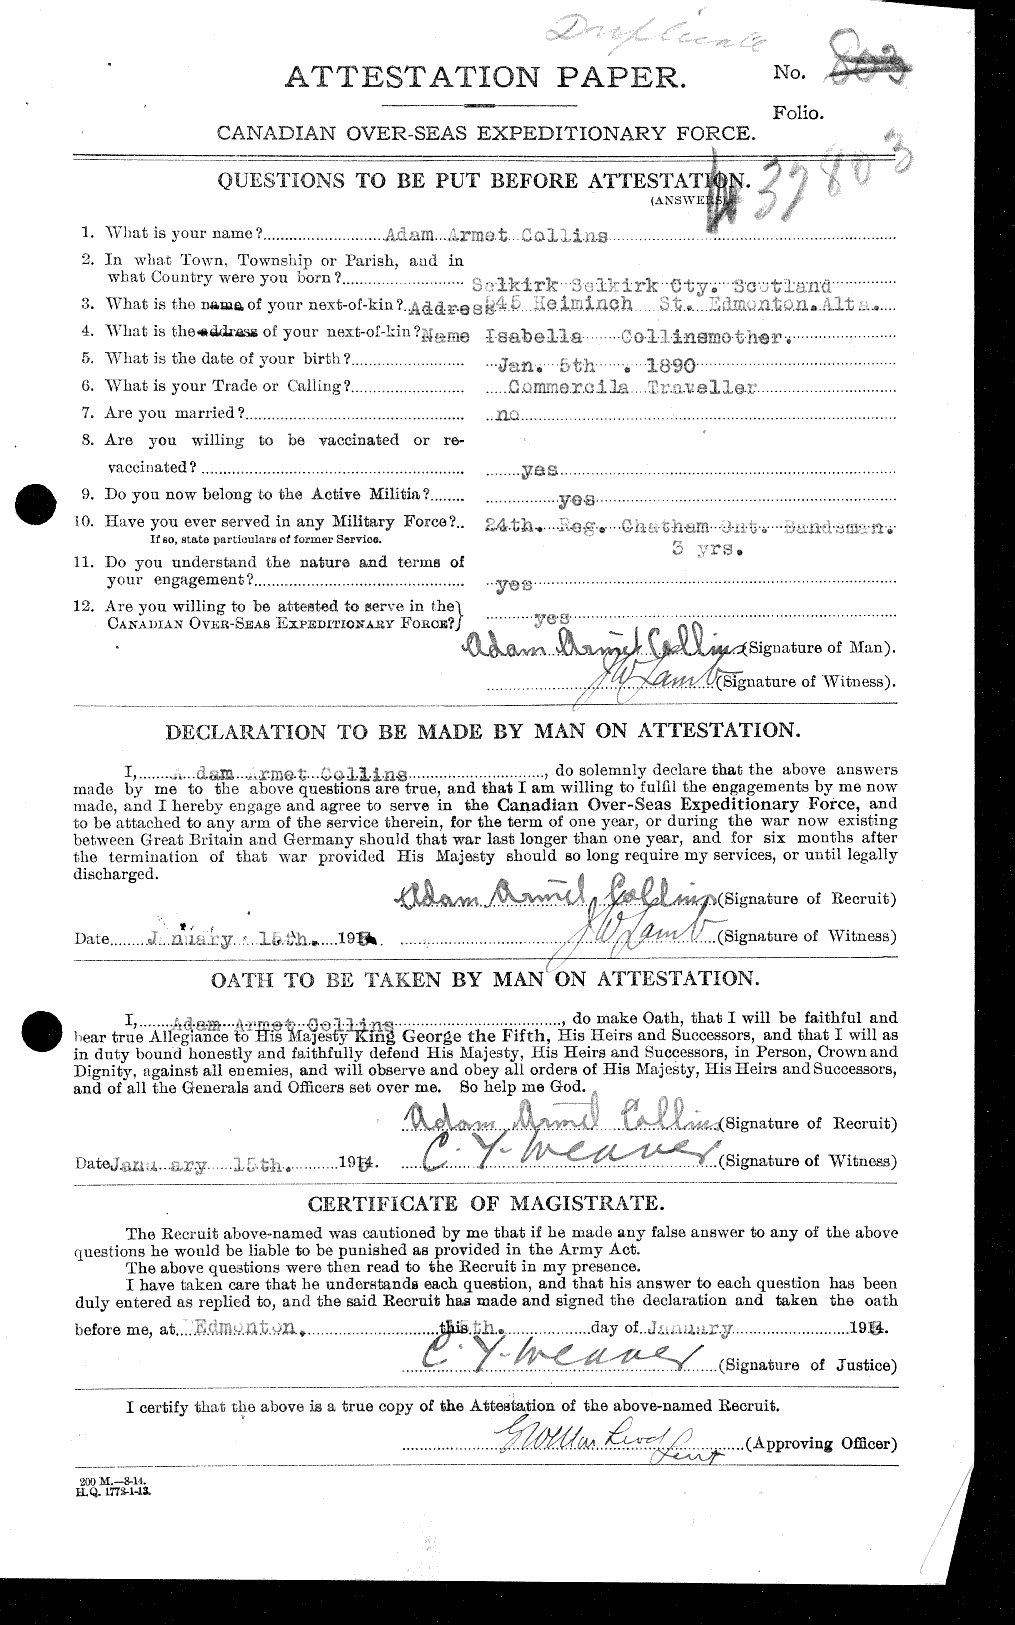 Personnel Records of the First World War - CEF 028913a